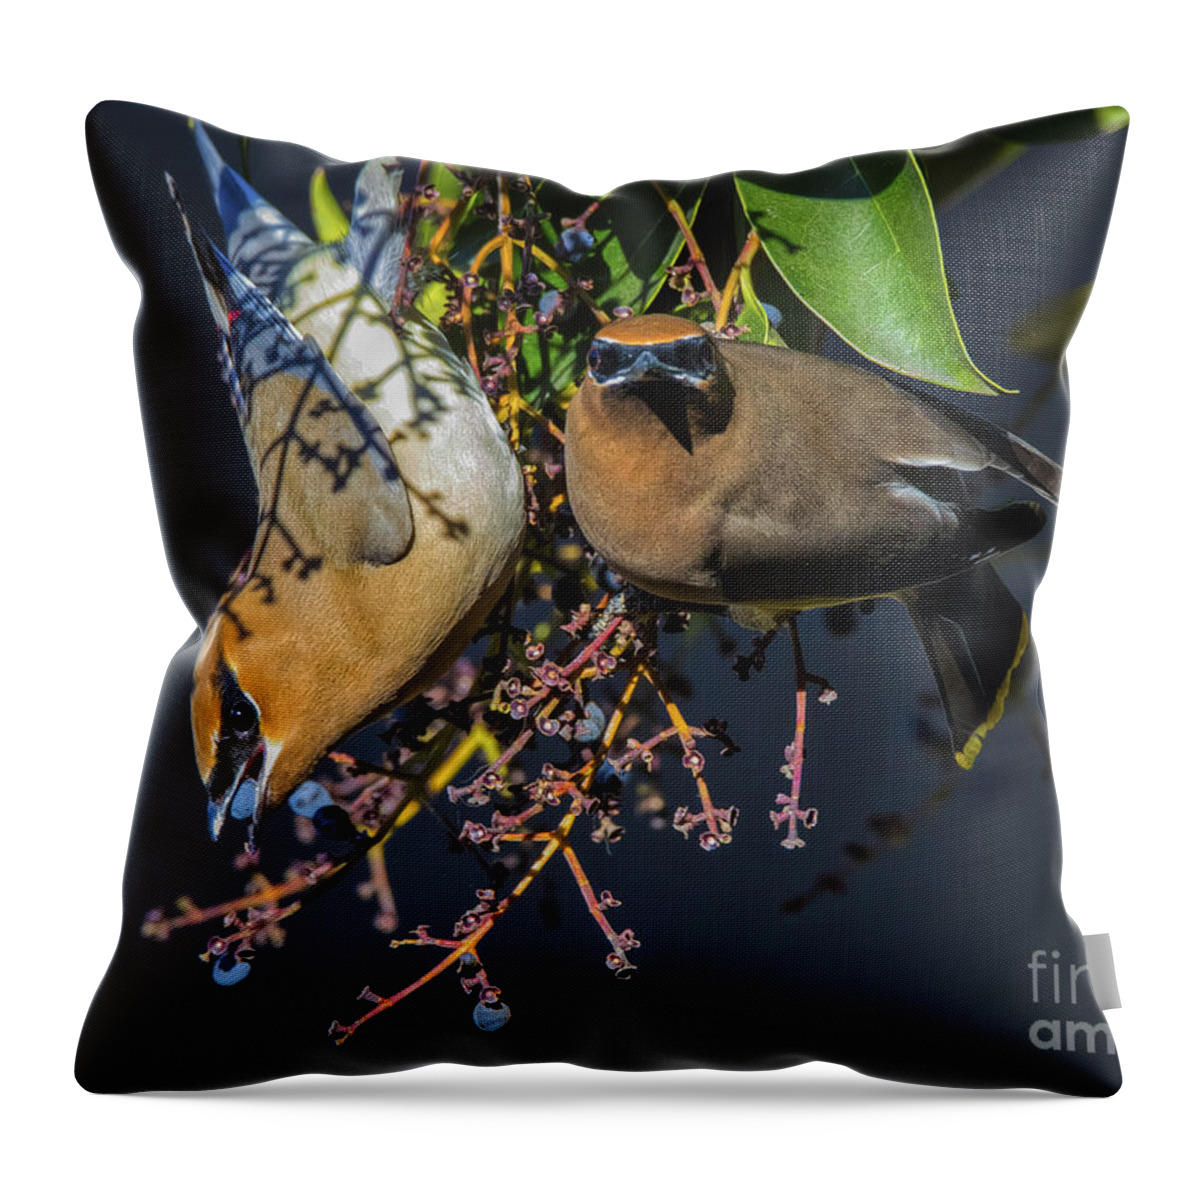 Ying Yang Throw Pillow featuring the photograph Ying Yang by Mitch Shindelbower